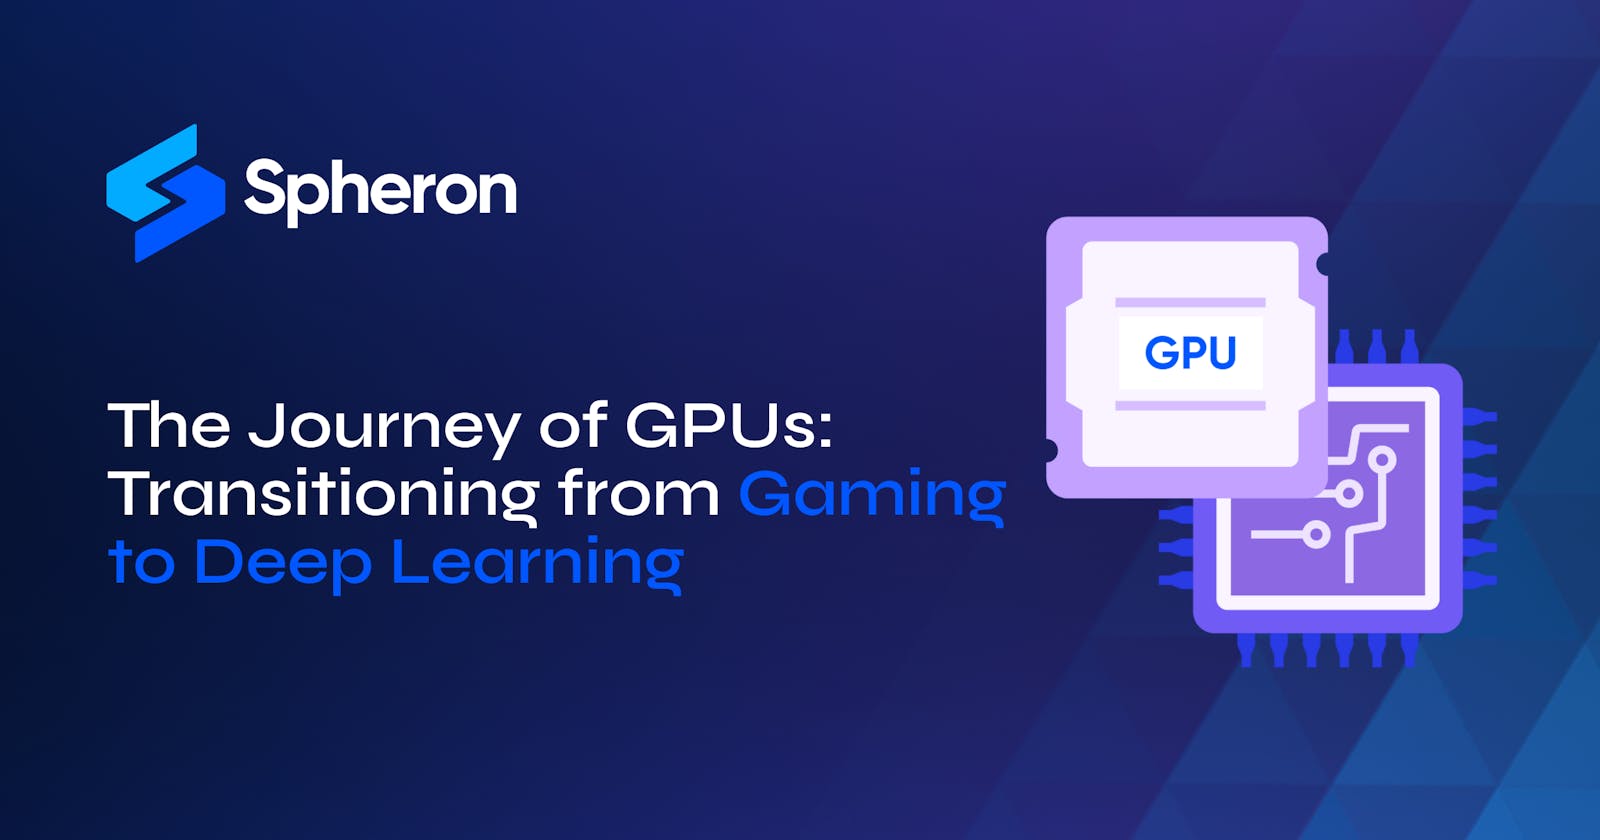 The Journey of GPUs: Transitioning from Gaming to Deep Learning